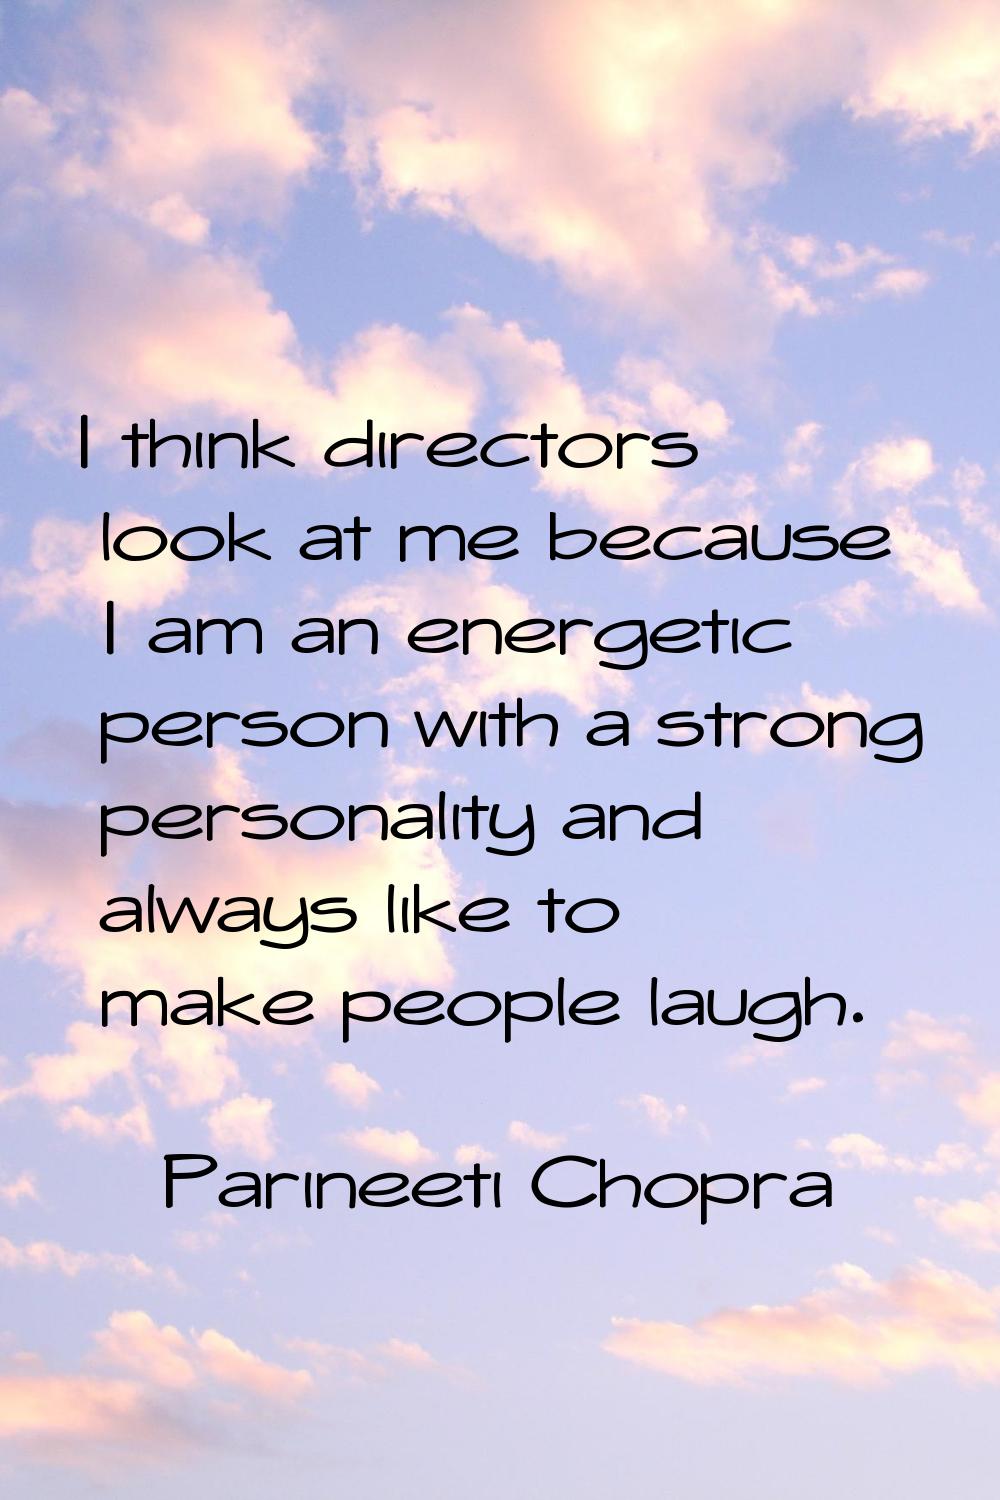 I think directors look at me because I am an energetic person with a strong personality and always 